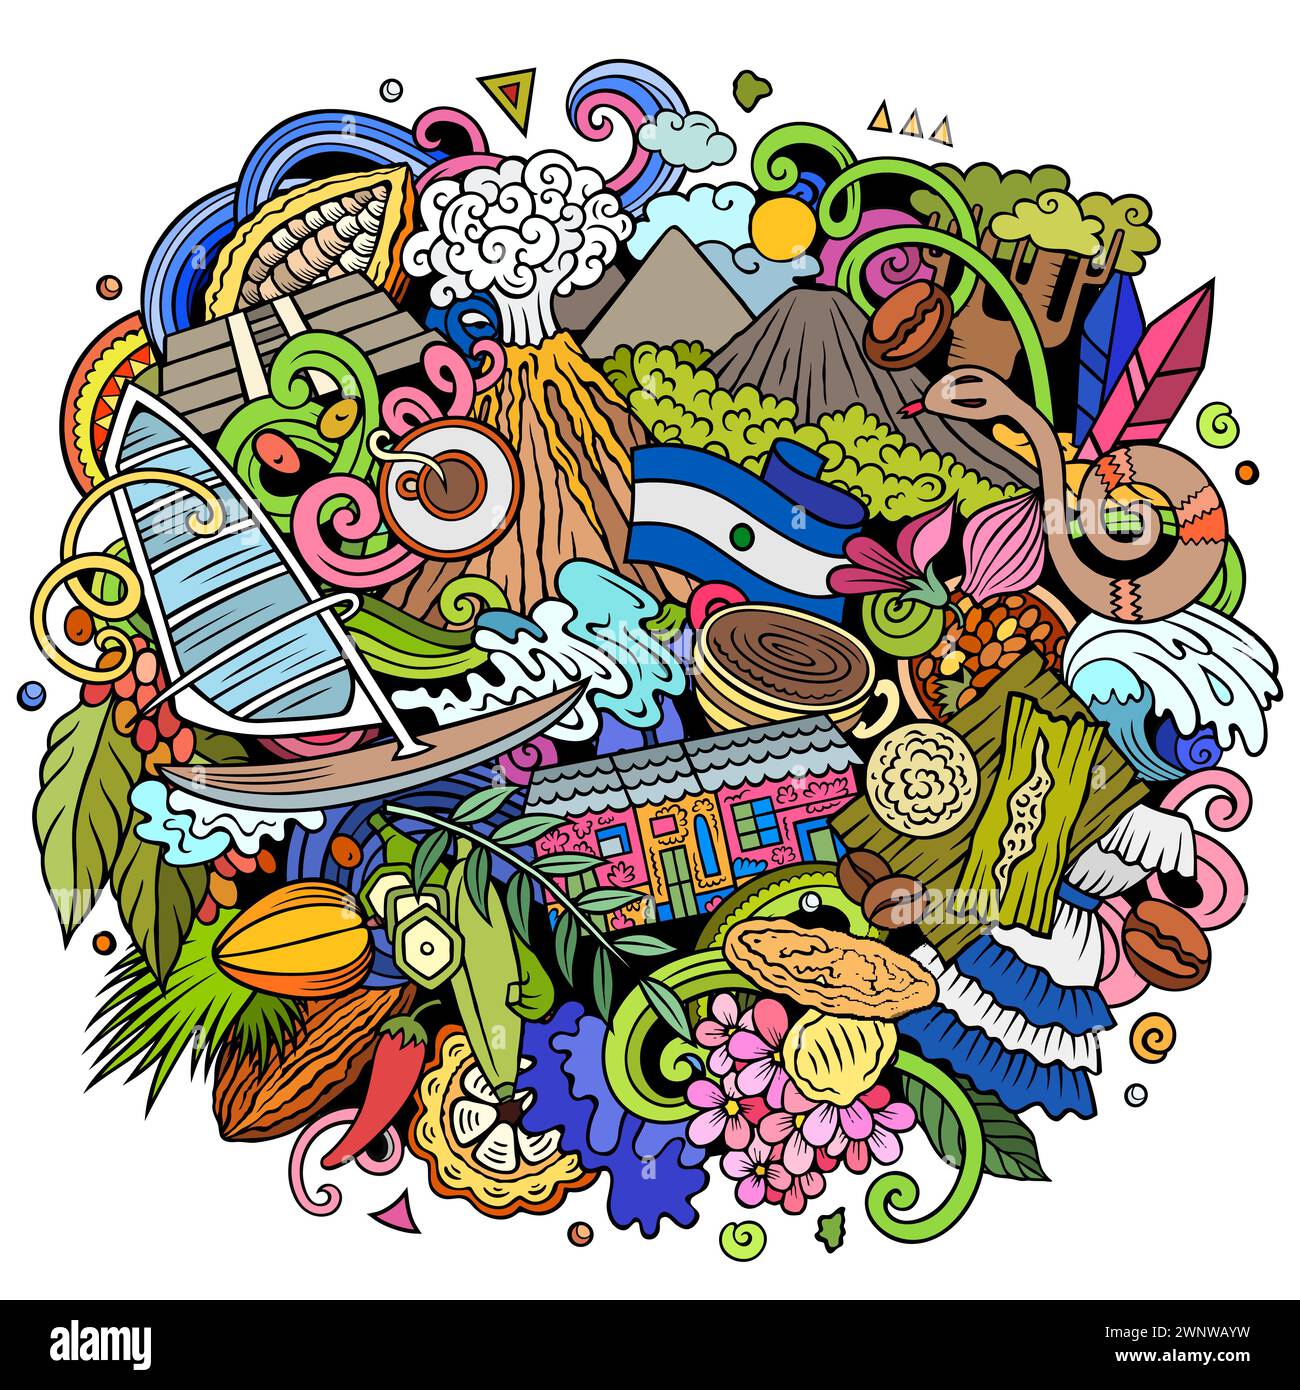 Vector funny doodle illustration with El Salvador theme. Vibrant and eye-catching design, capturing the essence of Central America culture and traditi Stock Vector